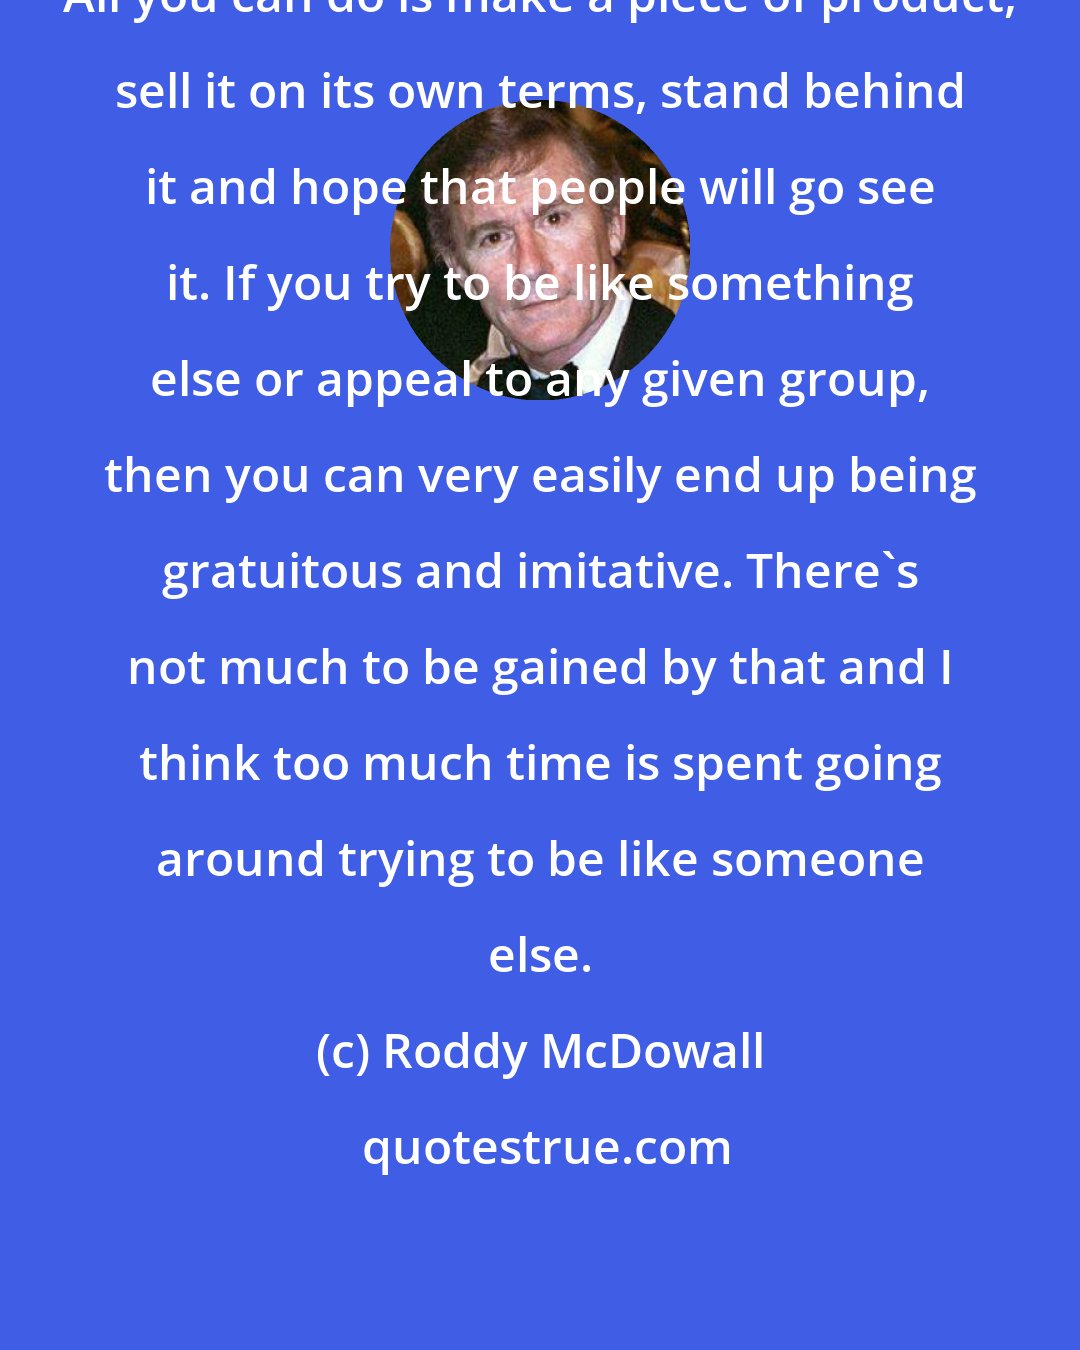 Roddy McDowall: All you can do is make a piece of product, sell it on its own terms, stand behind it and hope that people will go see it. If you try to be like something else or appeal to any given group, then you can very easily end up being gratuitous and imitative. There's not much to be gained by that and I think too much time is spent going around trying to be like someone else.